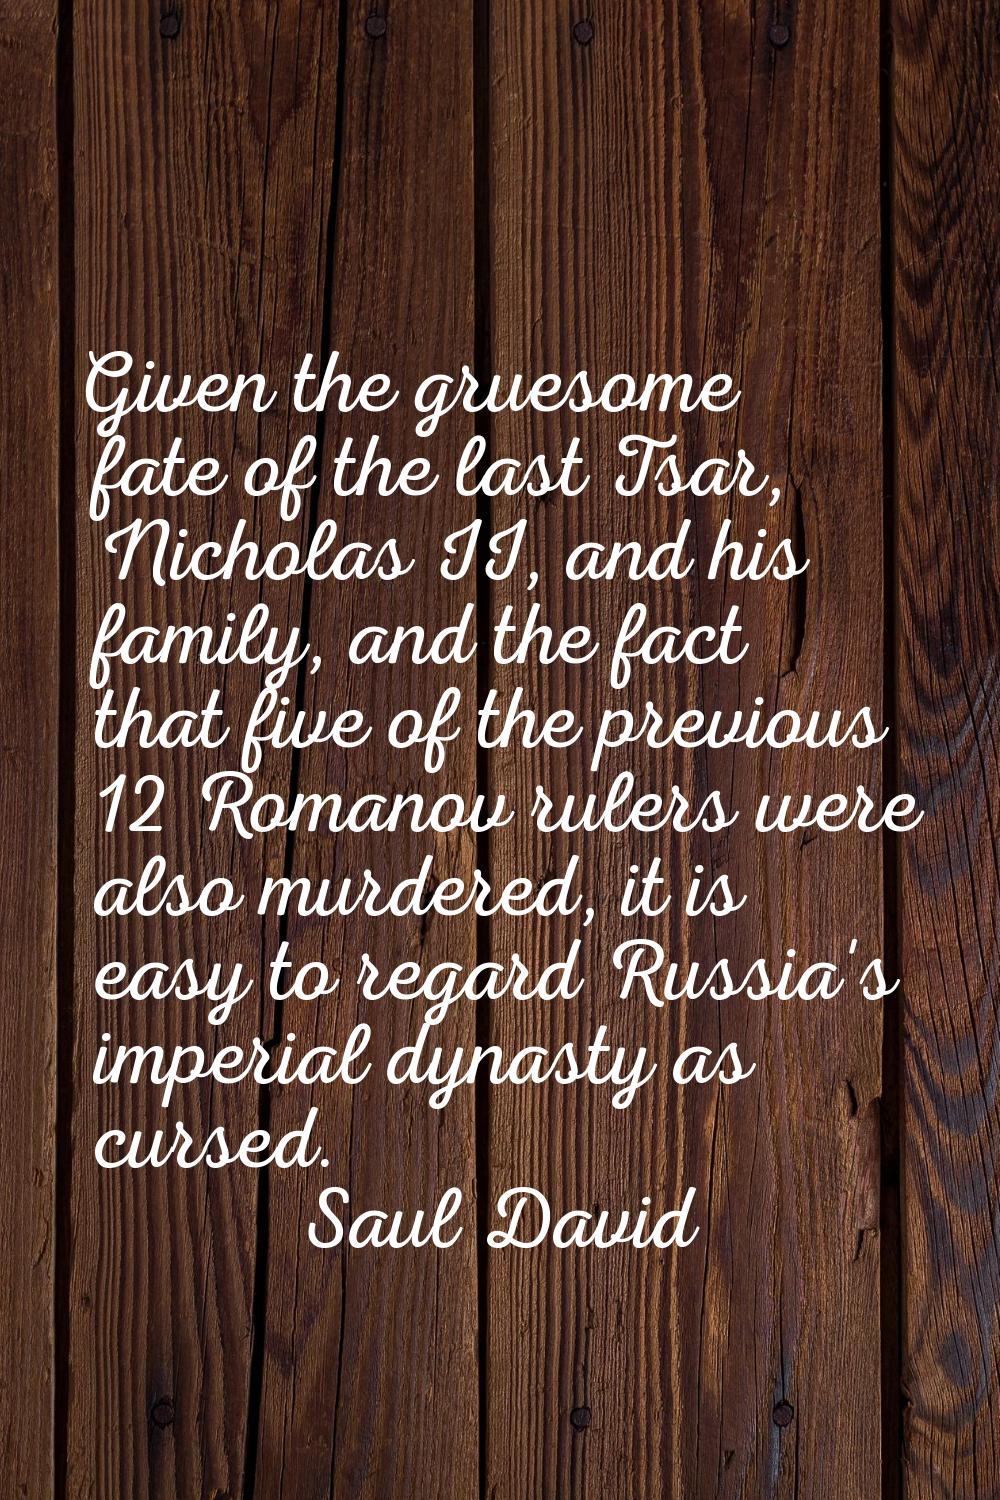 Given the gruesome fate of the last Tsar, Nicholas II, and his family, and the fact that five of th